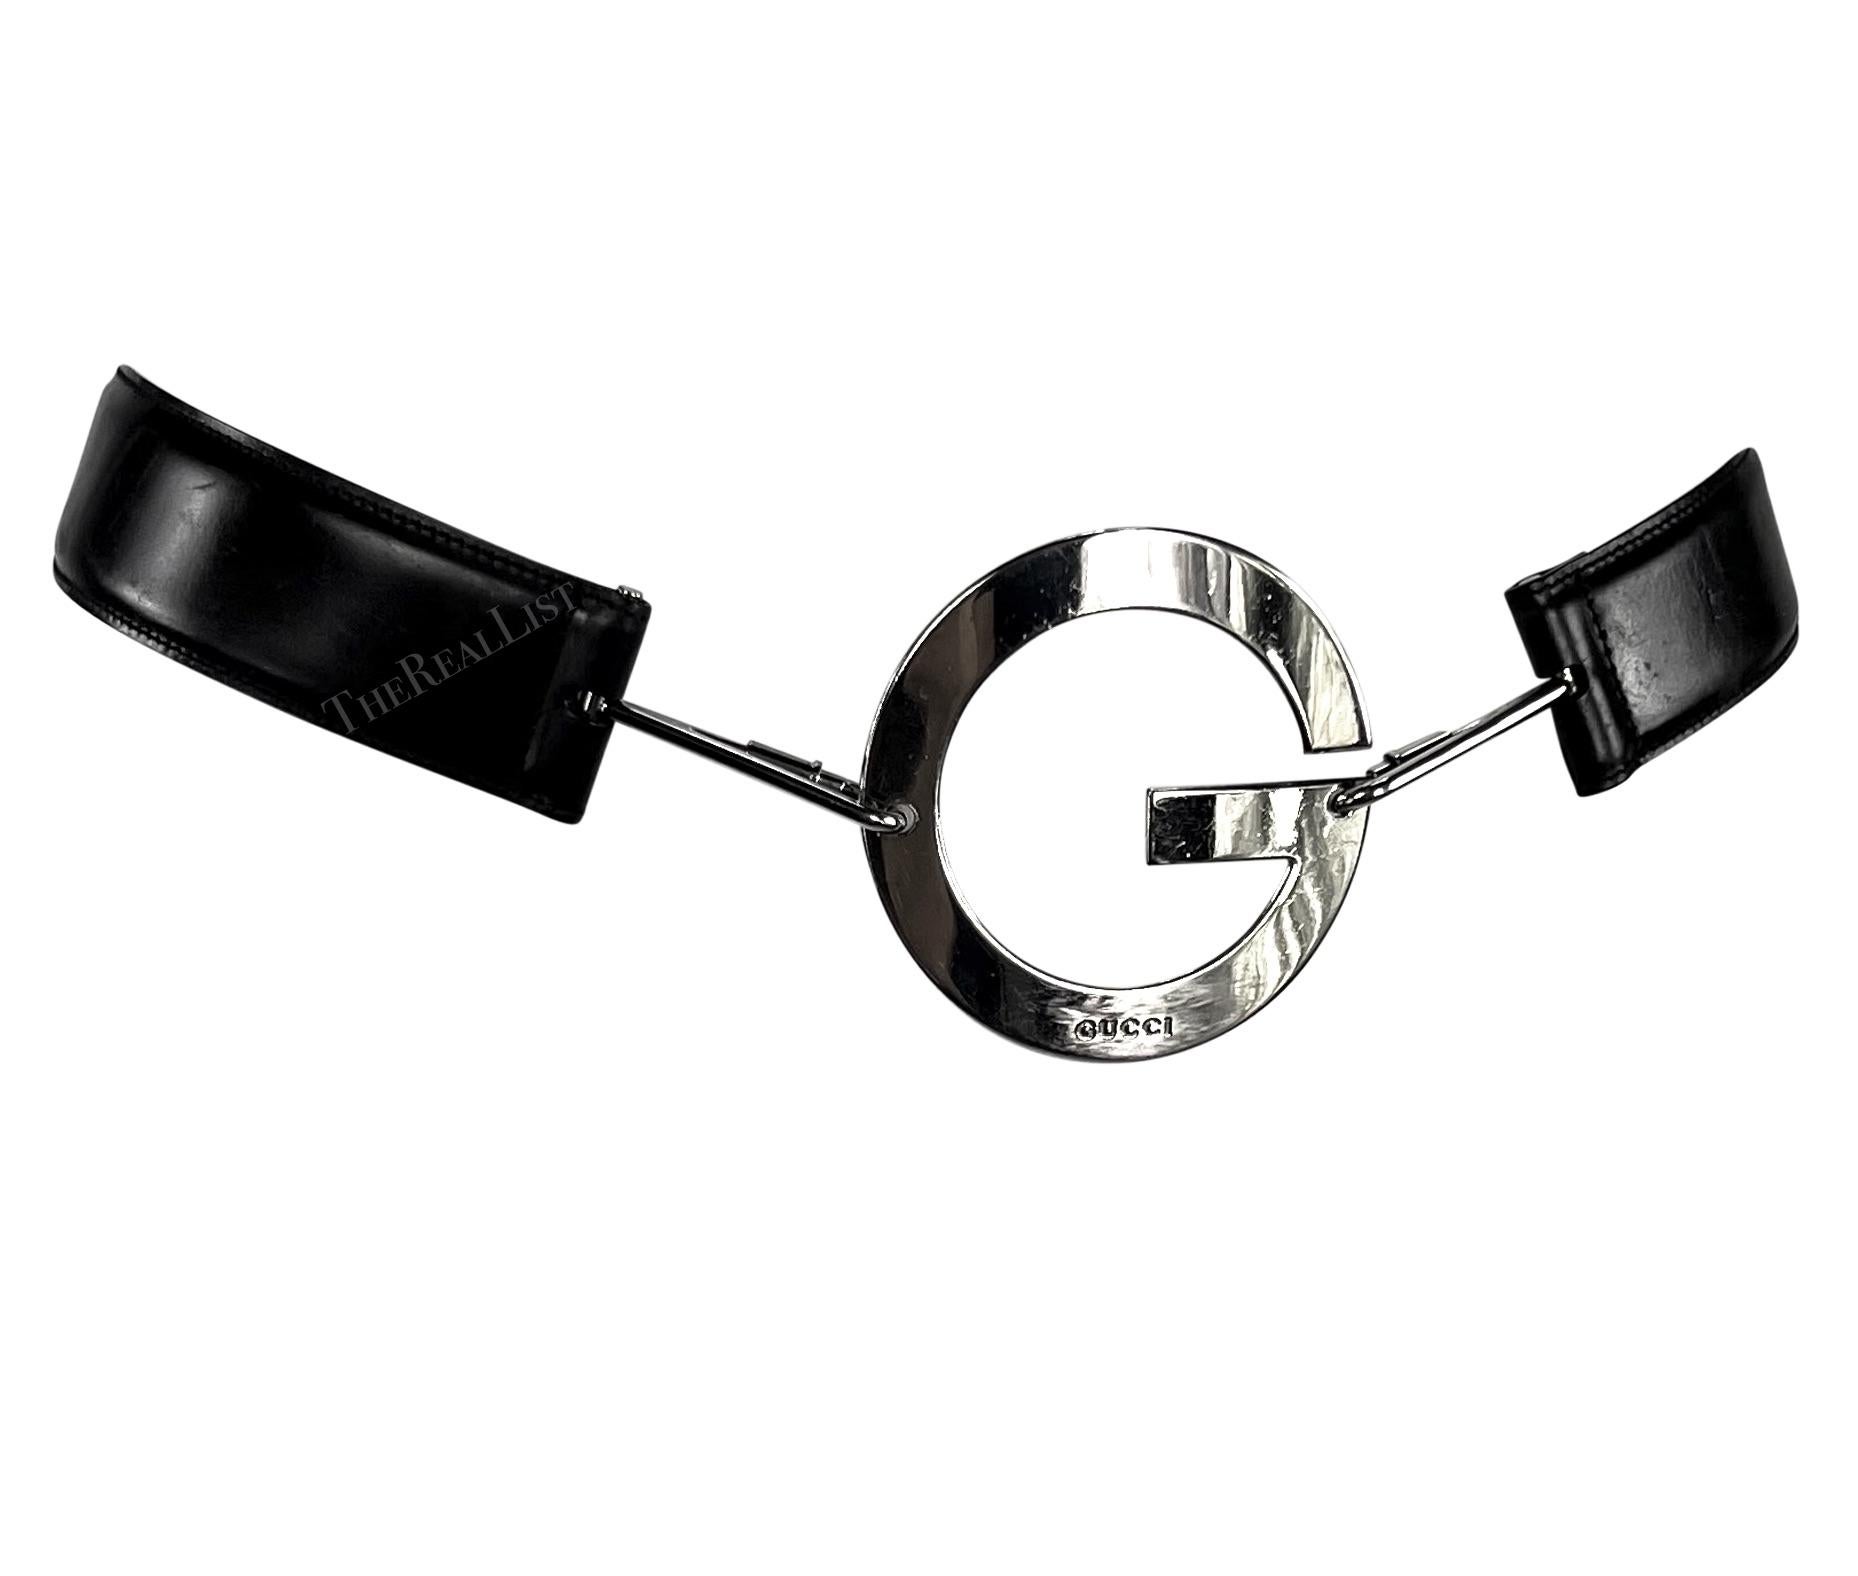 S/S 1996 Gucci by Tom Ford Silver Round G Medallion Buckle Black Belt For Sale 9